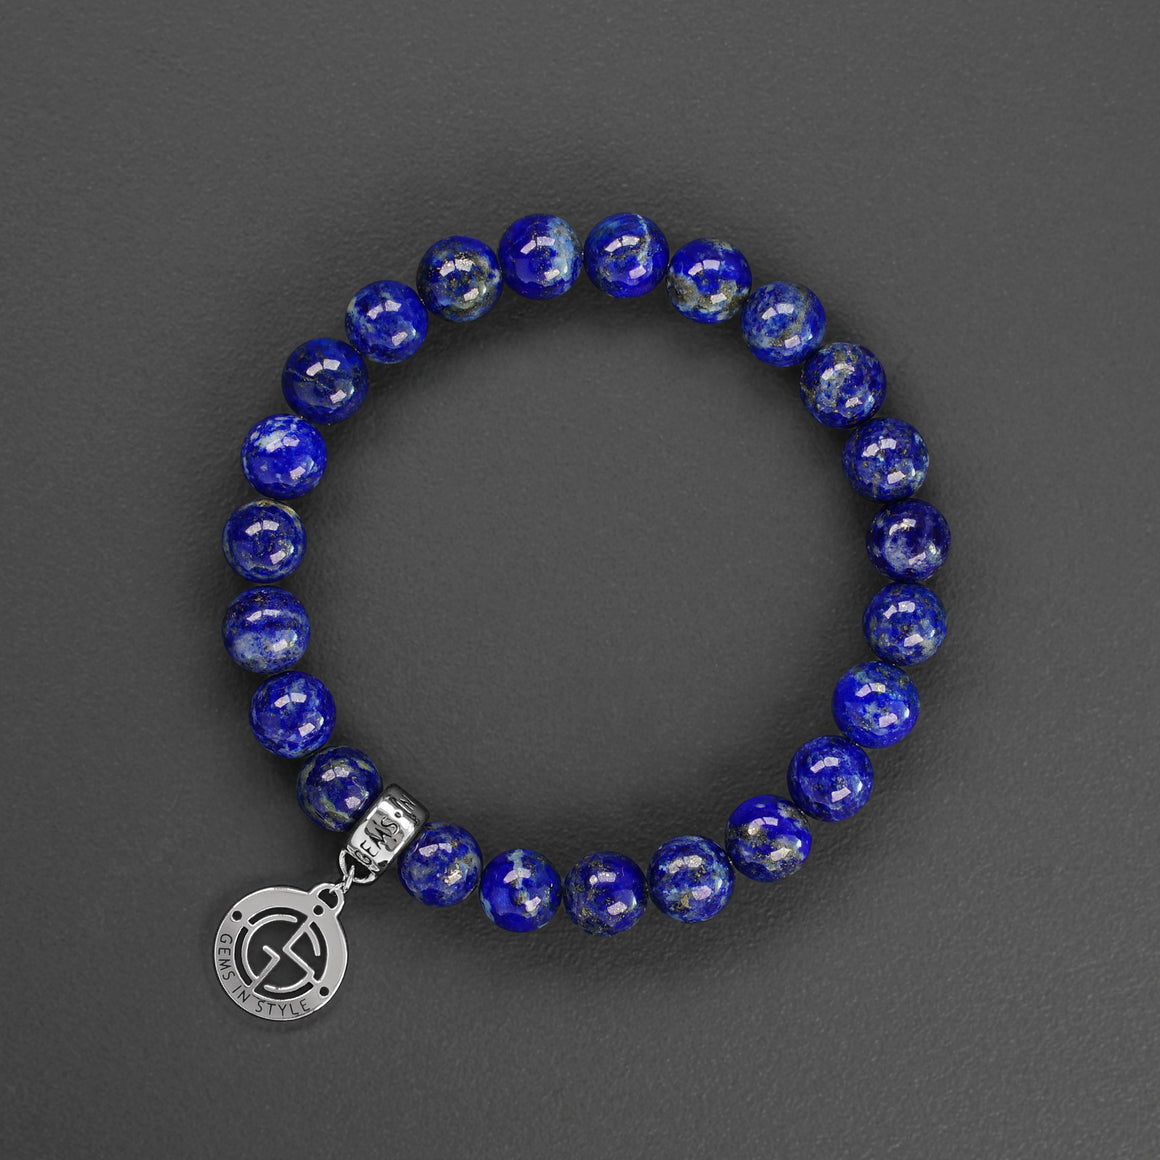 Lapis Lazuli natural gemstone bracelet with gold charm by Gems In Style Jewellery